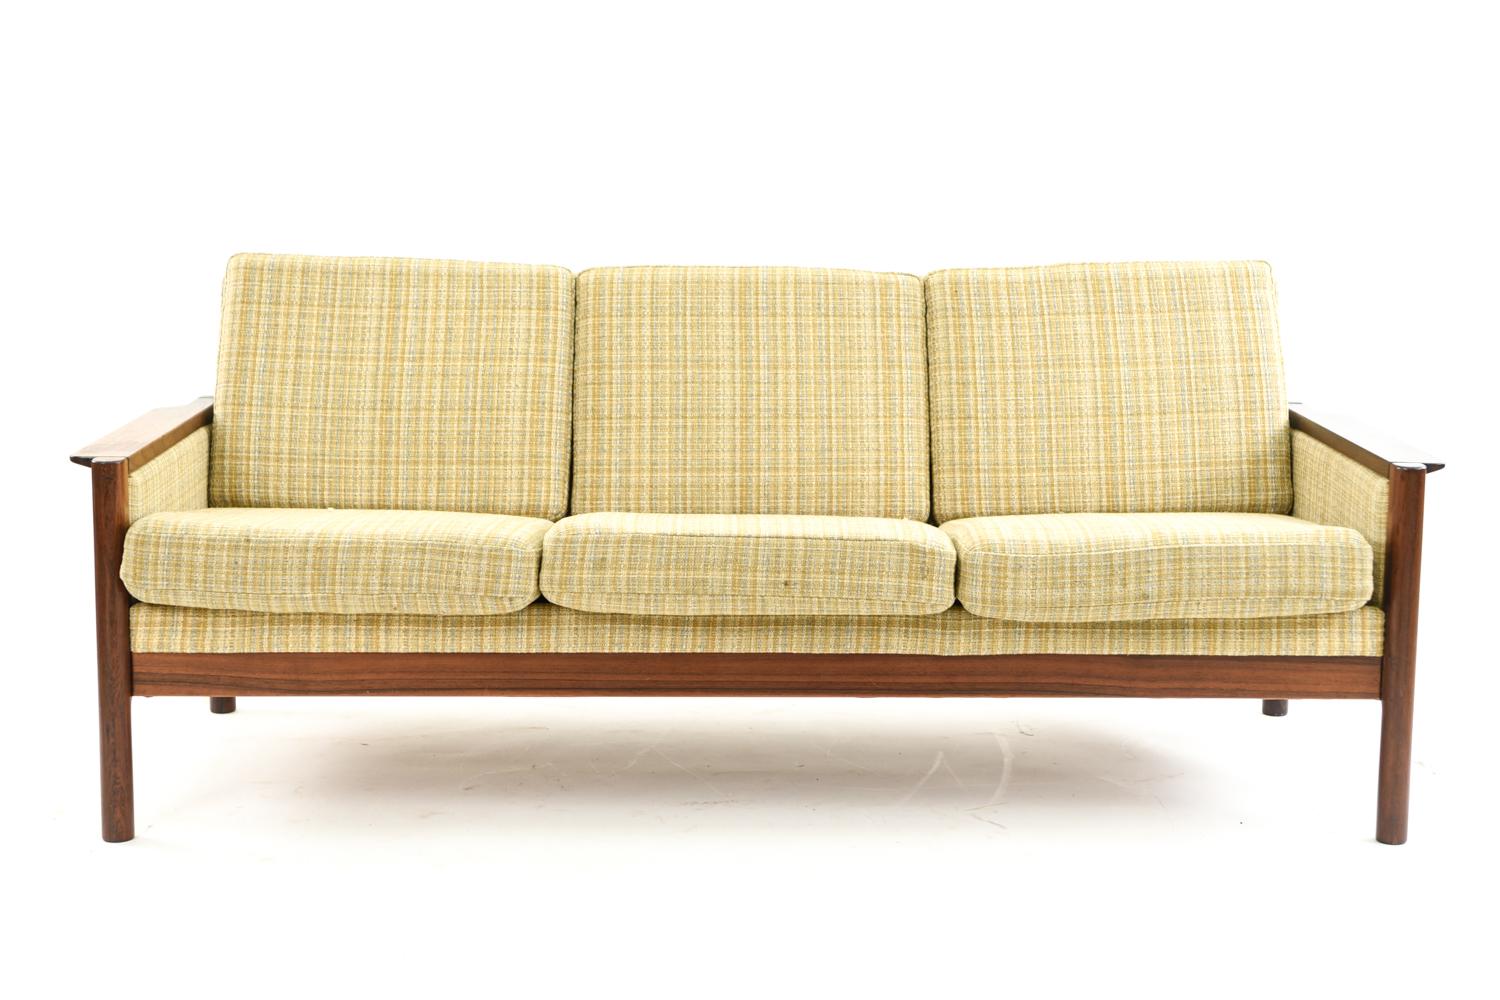 A mid-century Danish 3-seat sofa designed by Kai Kristiansen. Featuring a rosewood frame.